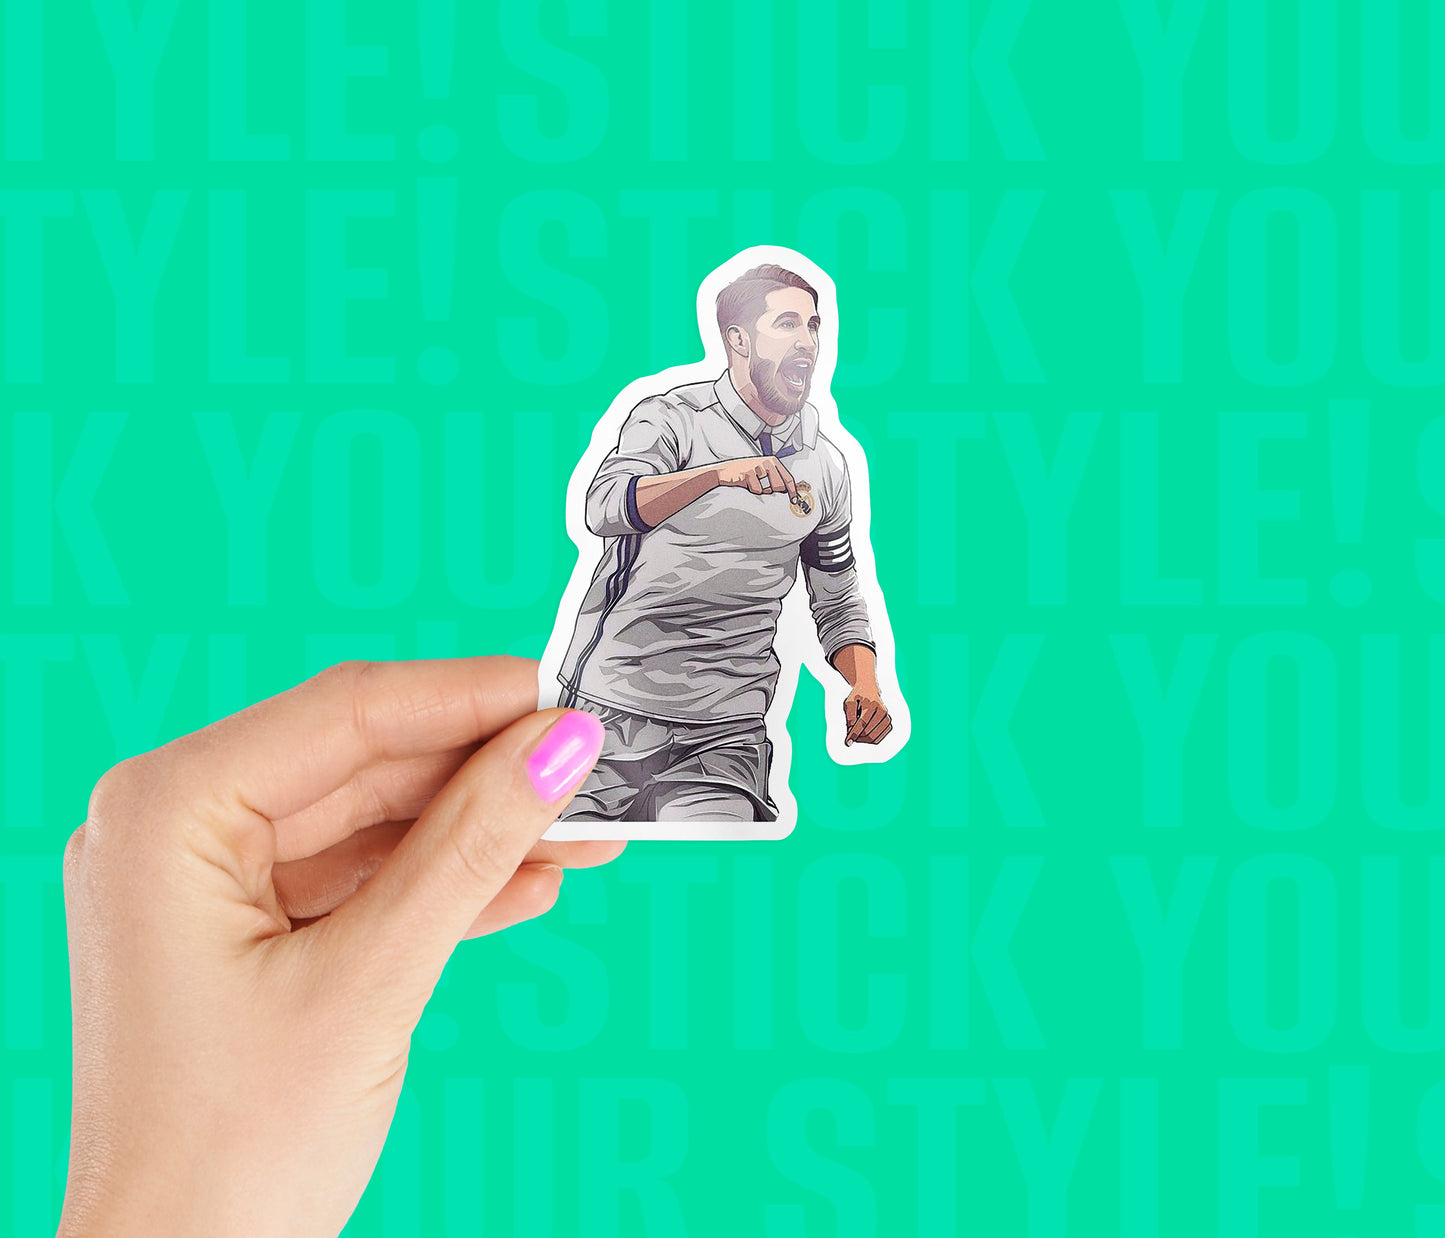 Real Madrid Player Magnetic Sticker